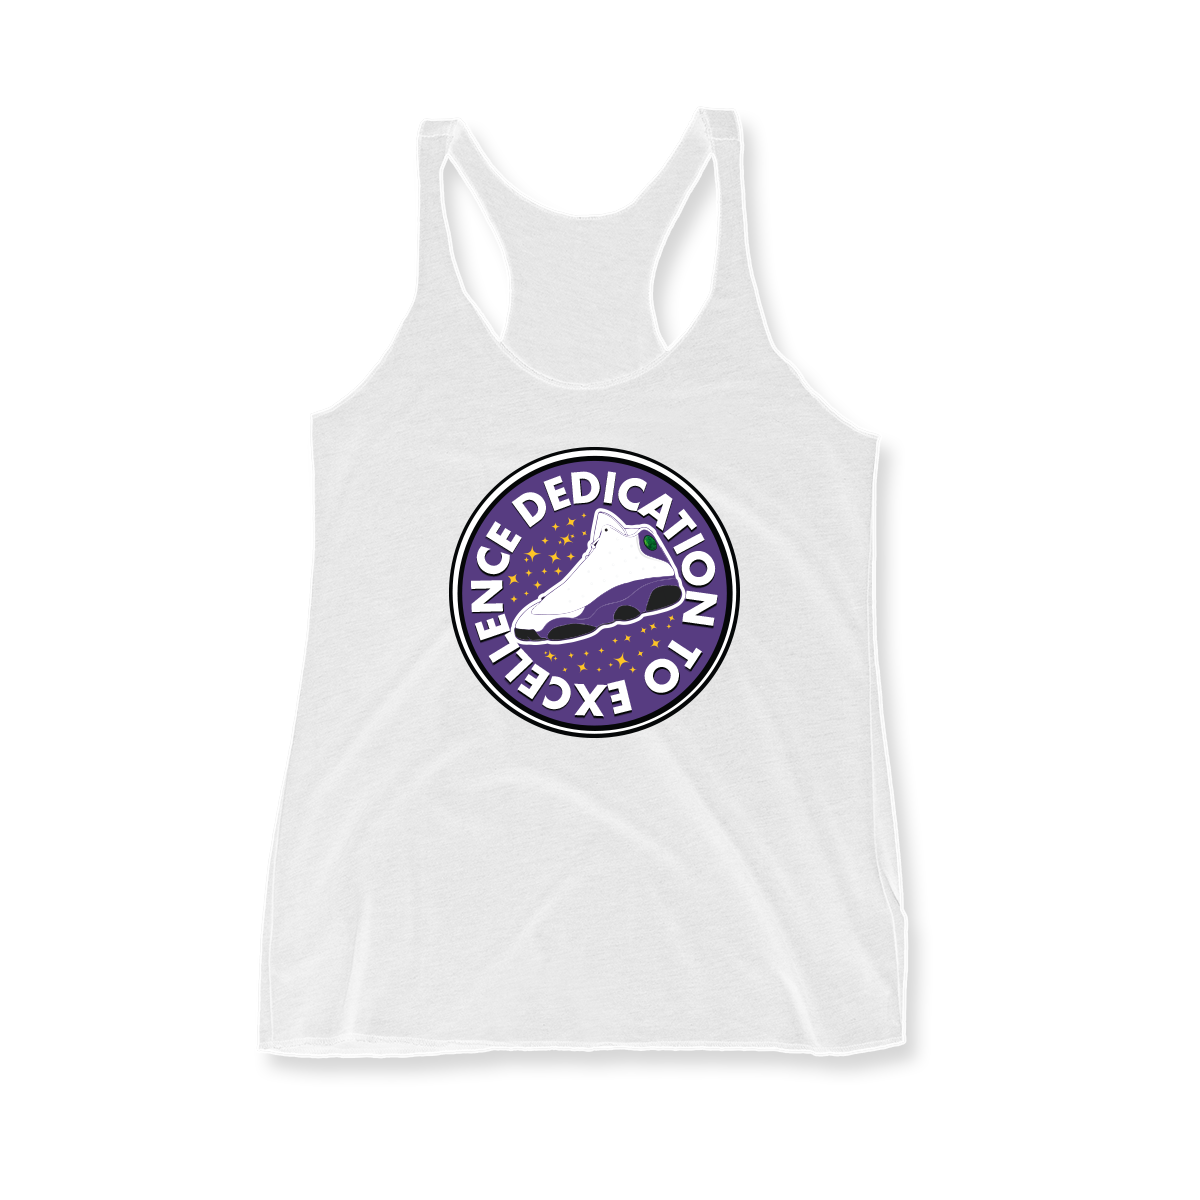 'Dedication To Excellence' in Lakers CW Women's Racerback Tank